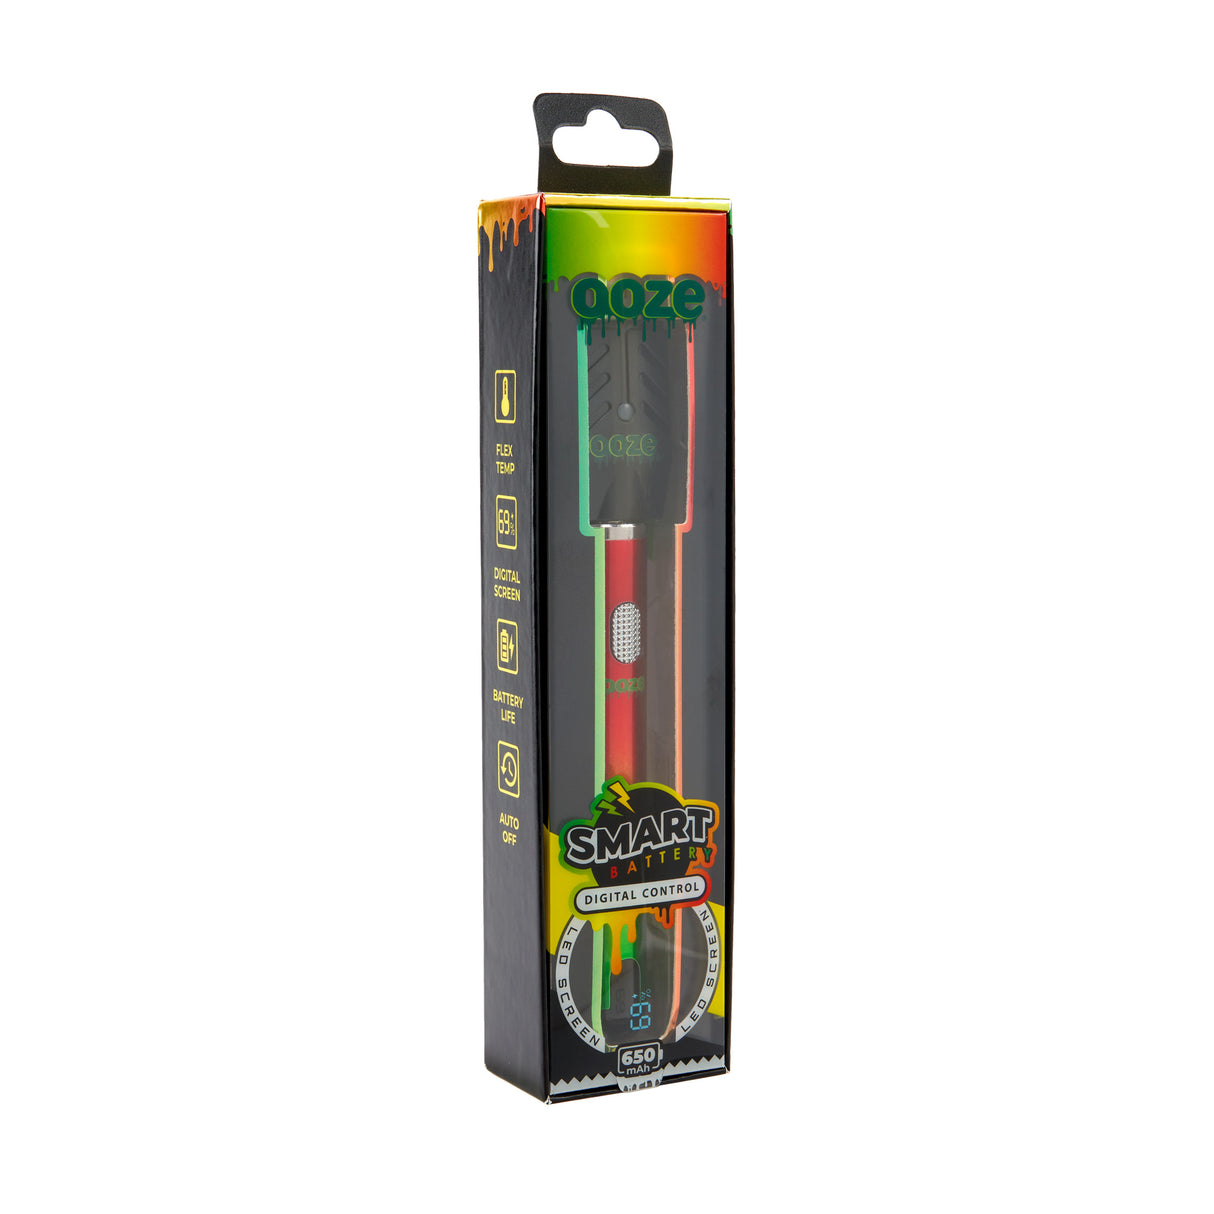 The rasta Ooze Smart Battery is in the box on an angle